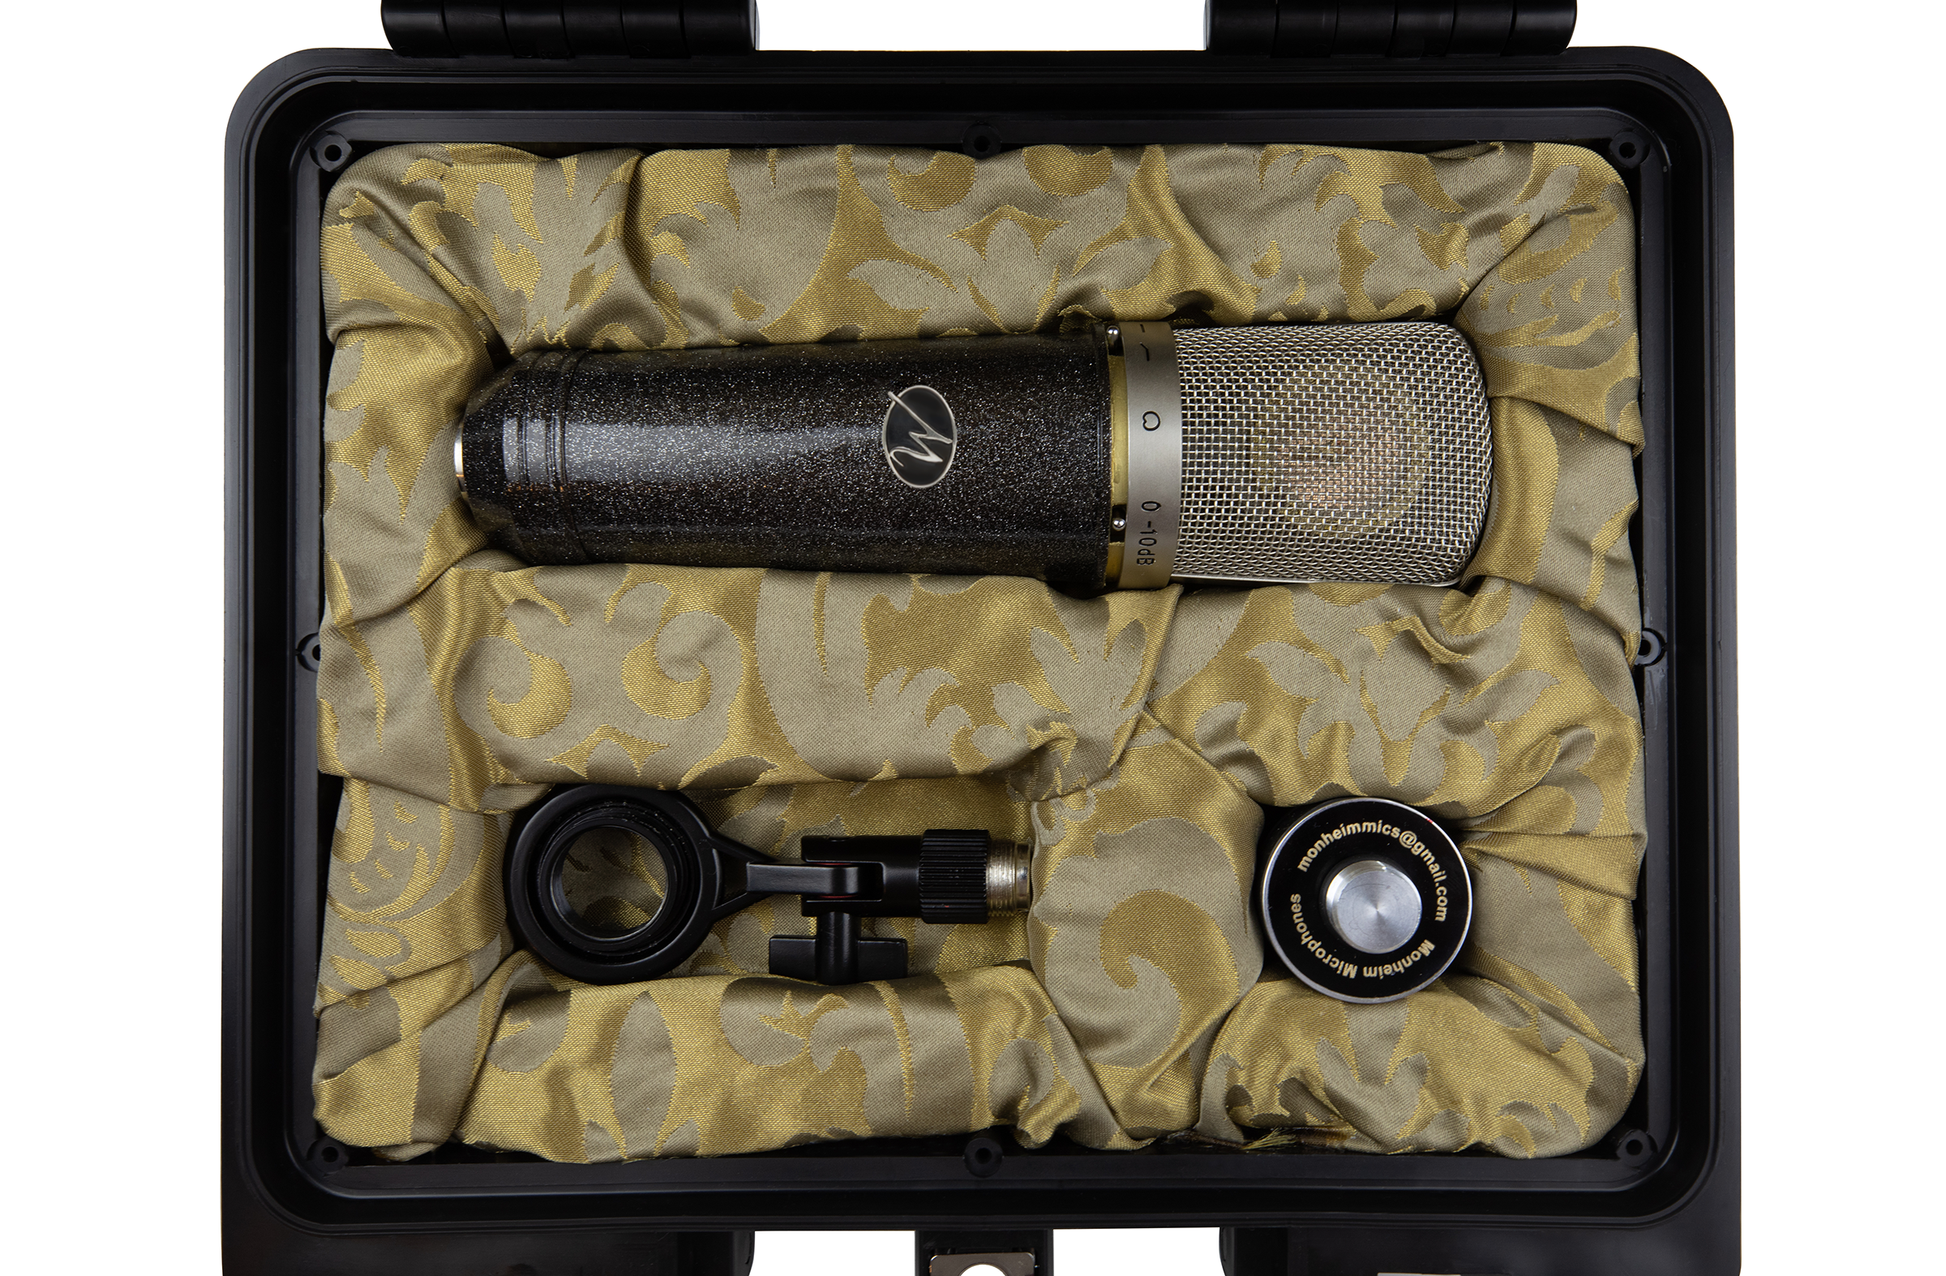 Monheim Microphones FET large diapragm condenser microphone with clip and custom shockmount, in heavy-duty travel case lined with gold fabric.